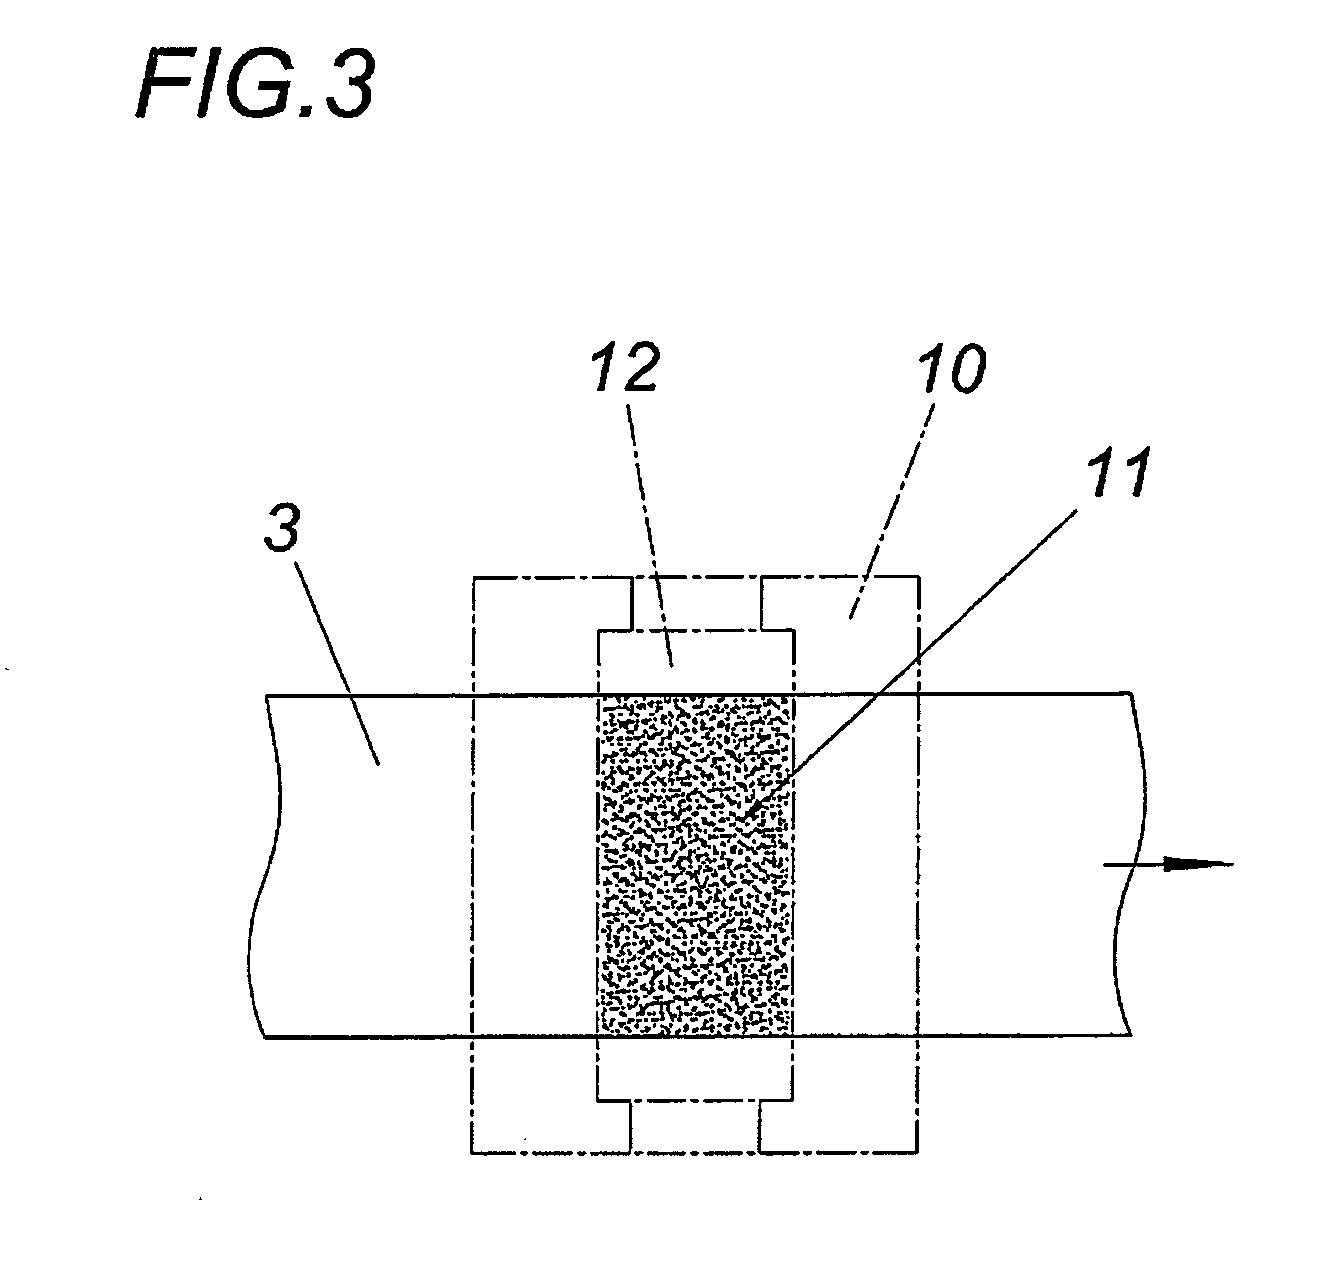 Method for heat treating a rolling stock made of a heat-treatable aluminum alloy